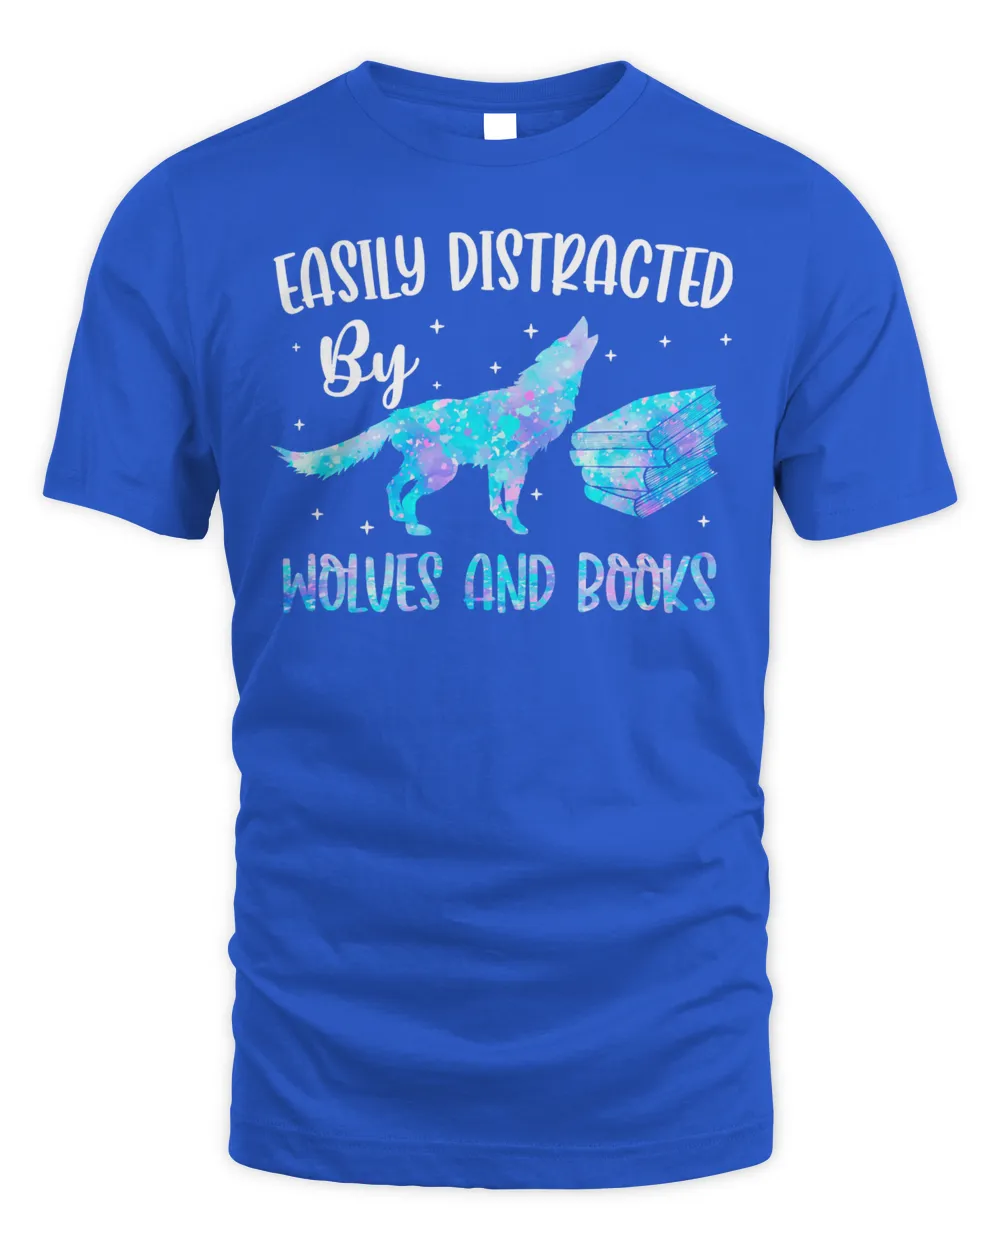 Easily Distracted By Wolves And Books Funny Cute Design For Books And WolvesLovers 2 Book Reader